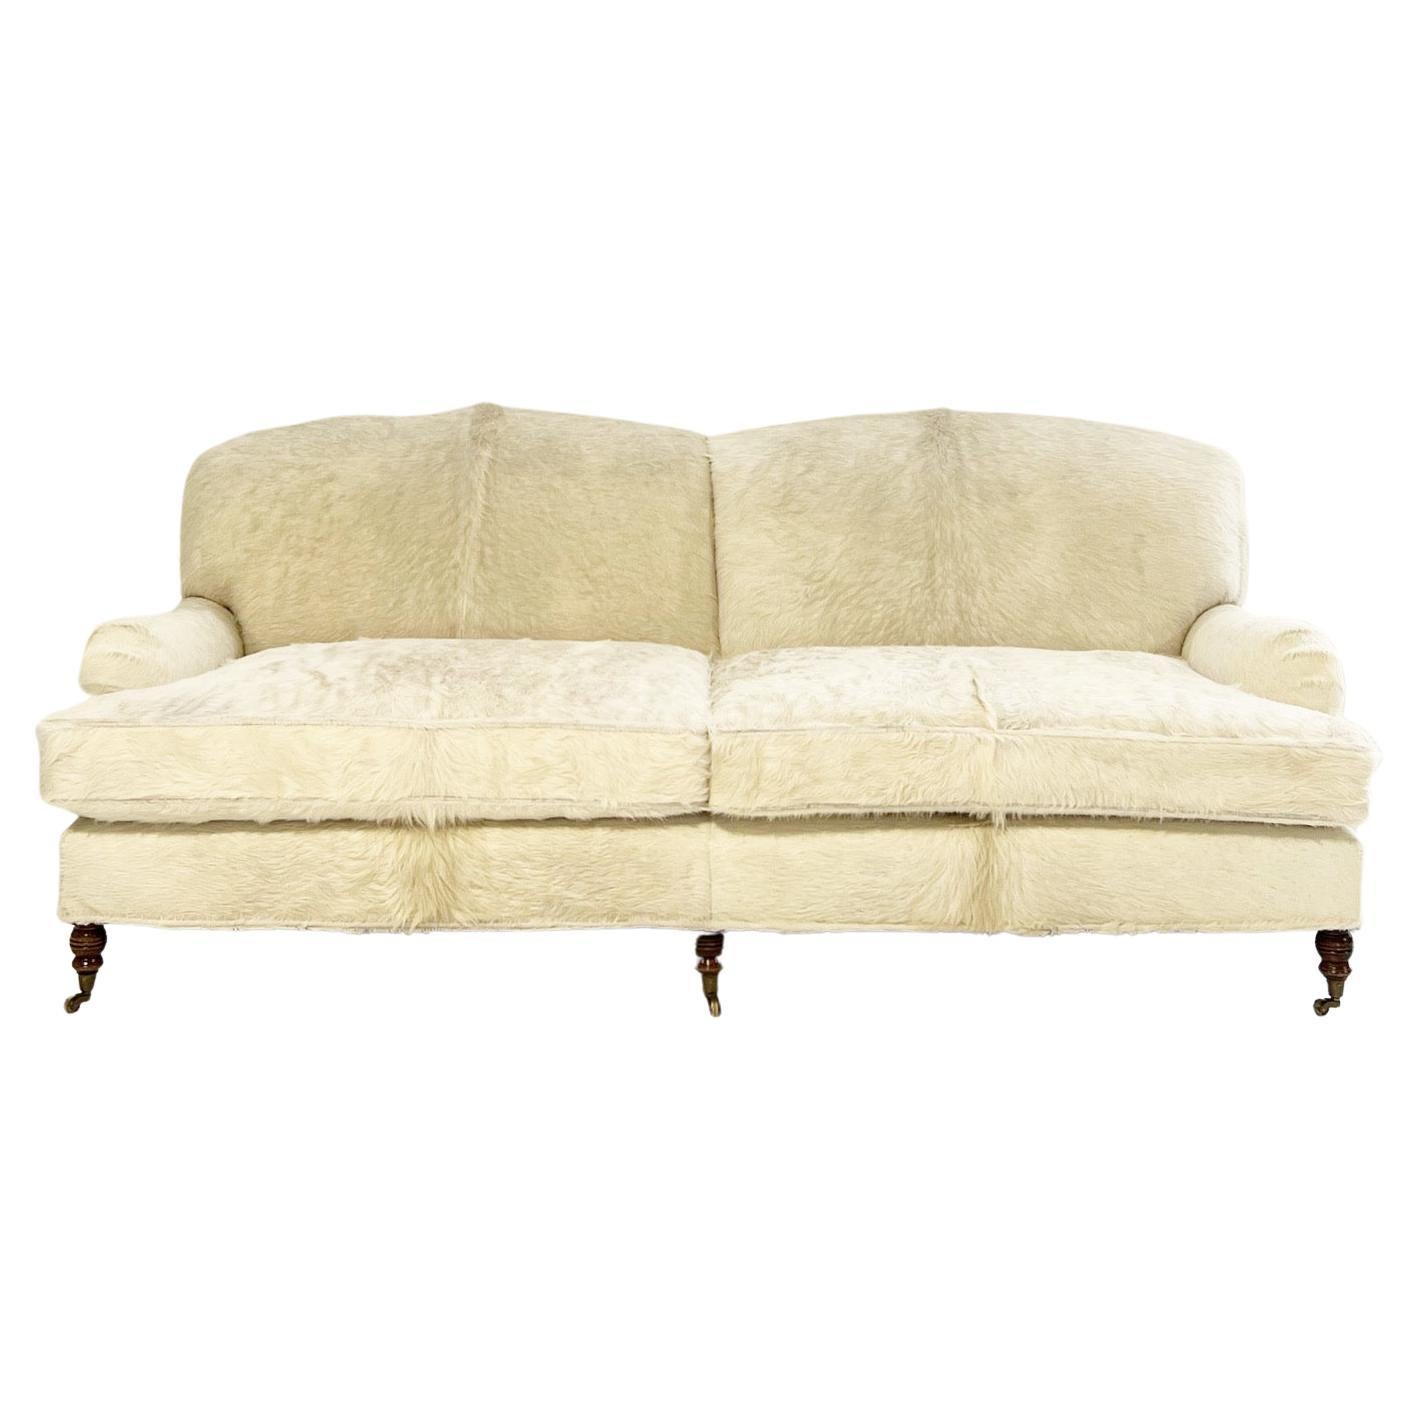 ON HOLD Vintage George Smith Signature Sofa Restored in Brazilian Cowhides For Sale